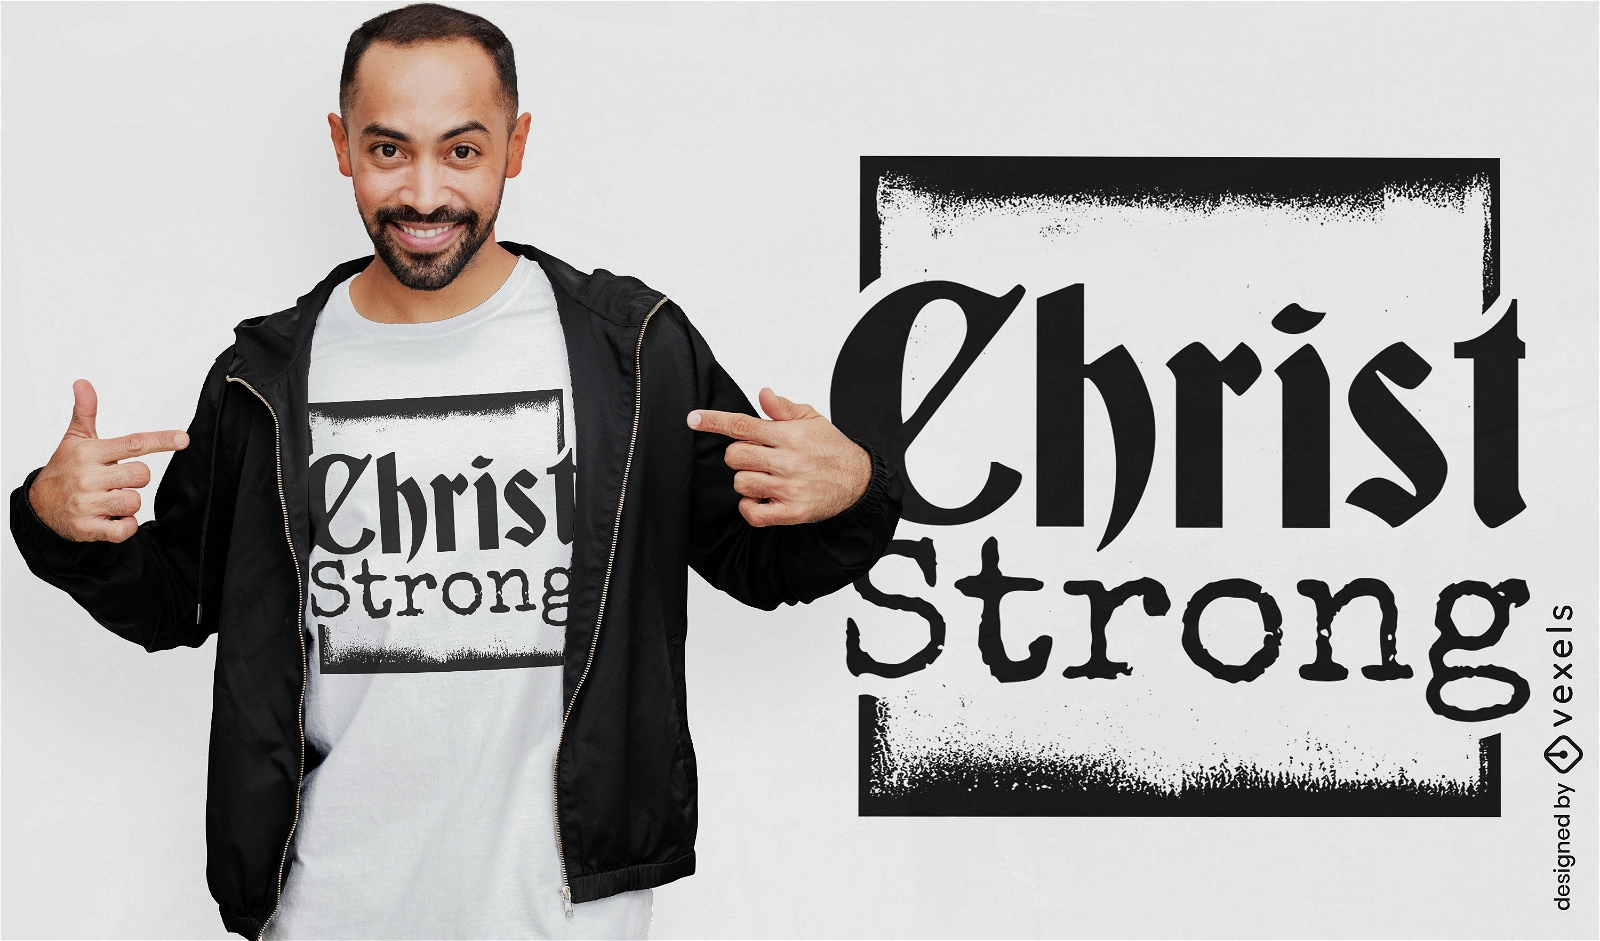 Christ strong quote t-shirt design